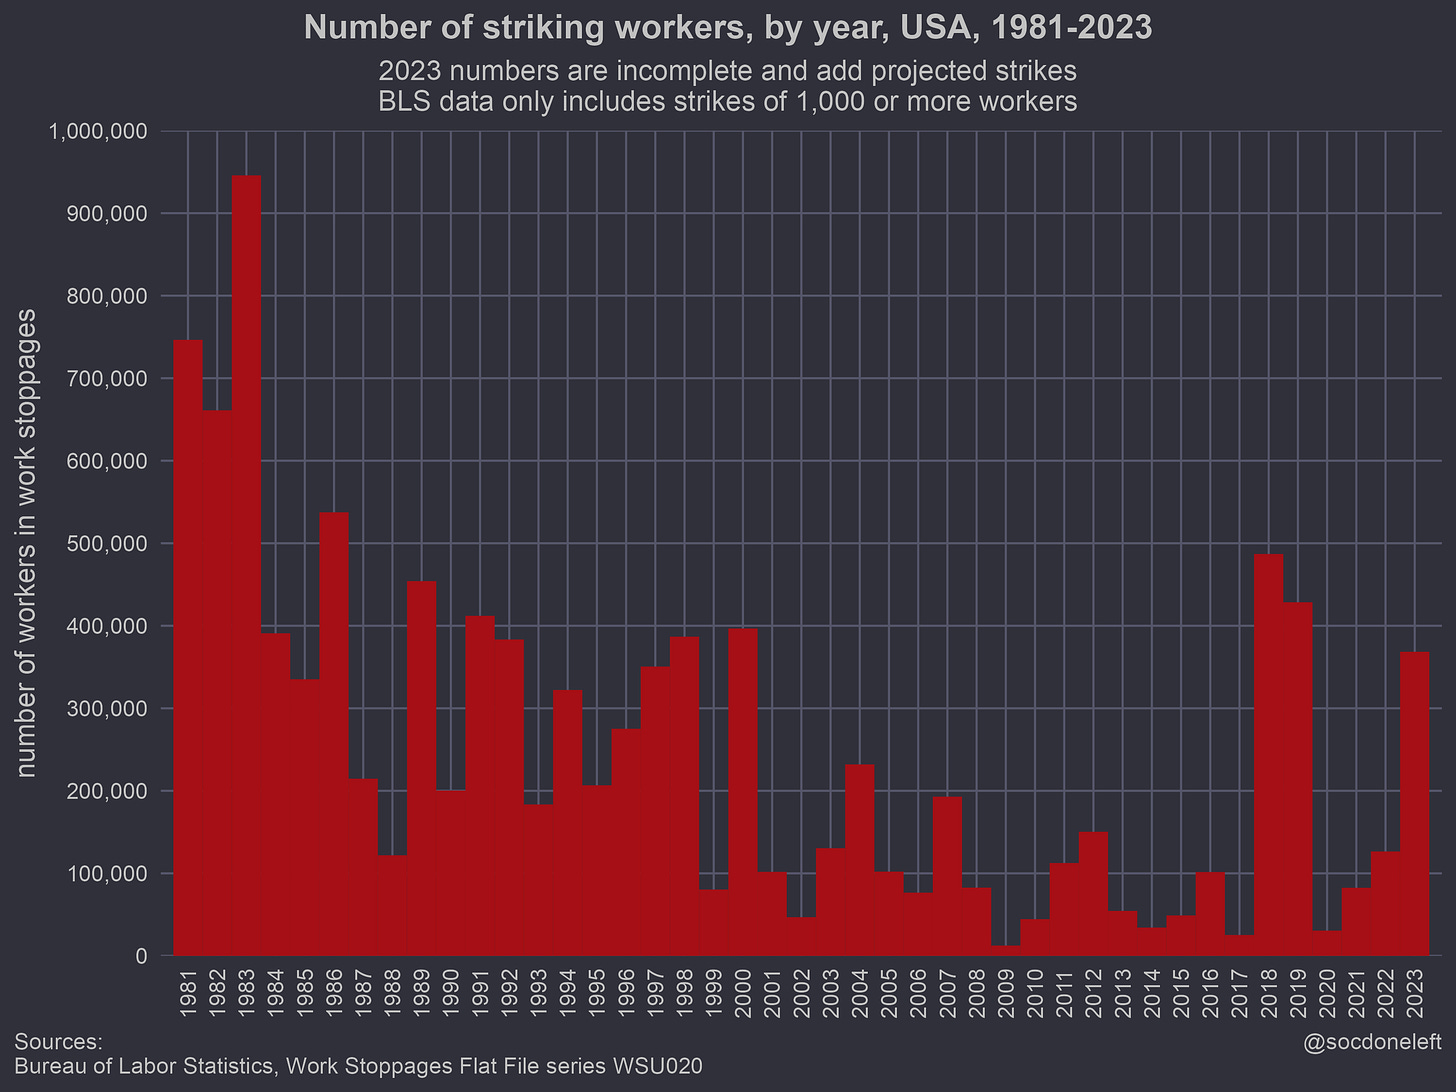 Work stoppages by year, BLS + own data